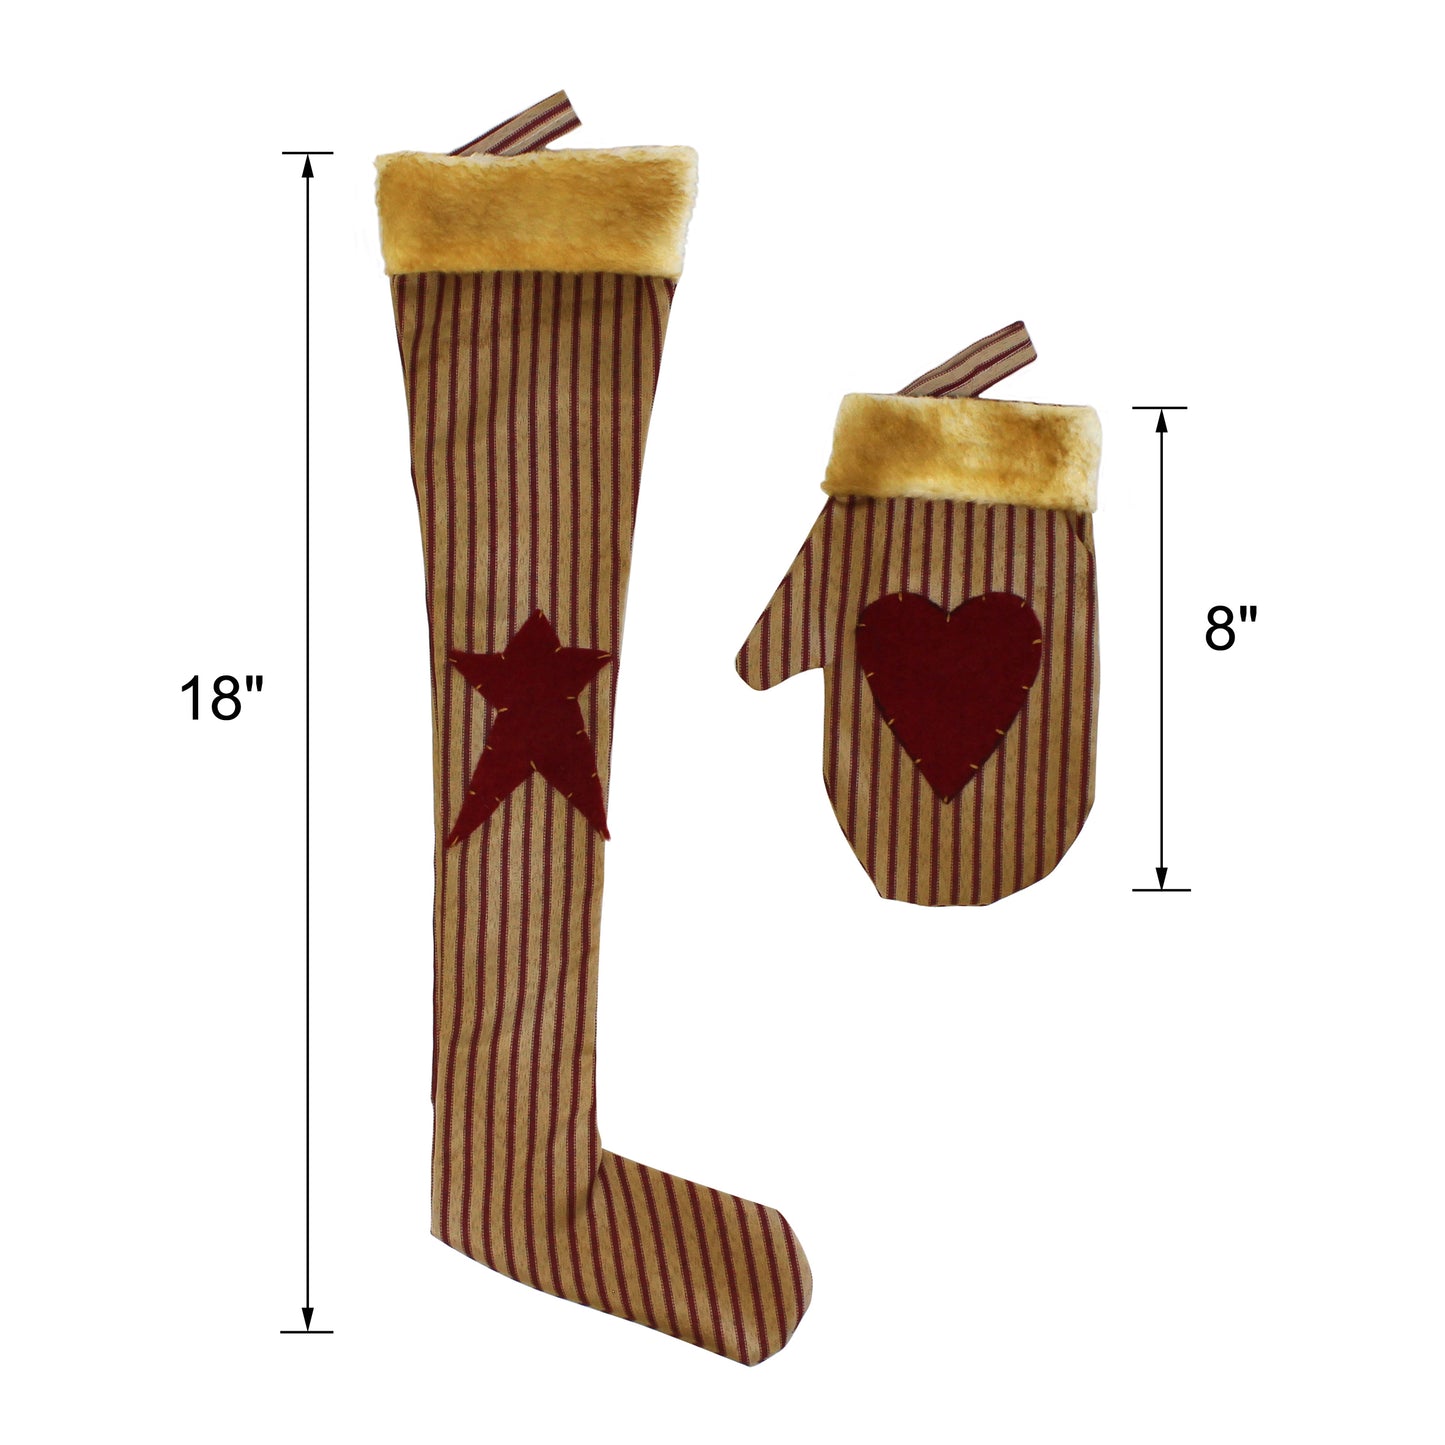 CVHOMEDECO. Rustic Antique Christmas Tree Hanging Stocking with Glove, Primitives Star, Heart Design Hanging Decoration Gifts, 2 Assorted